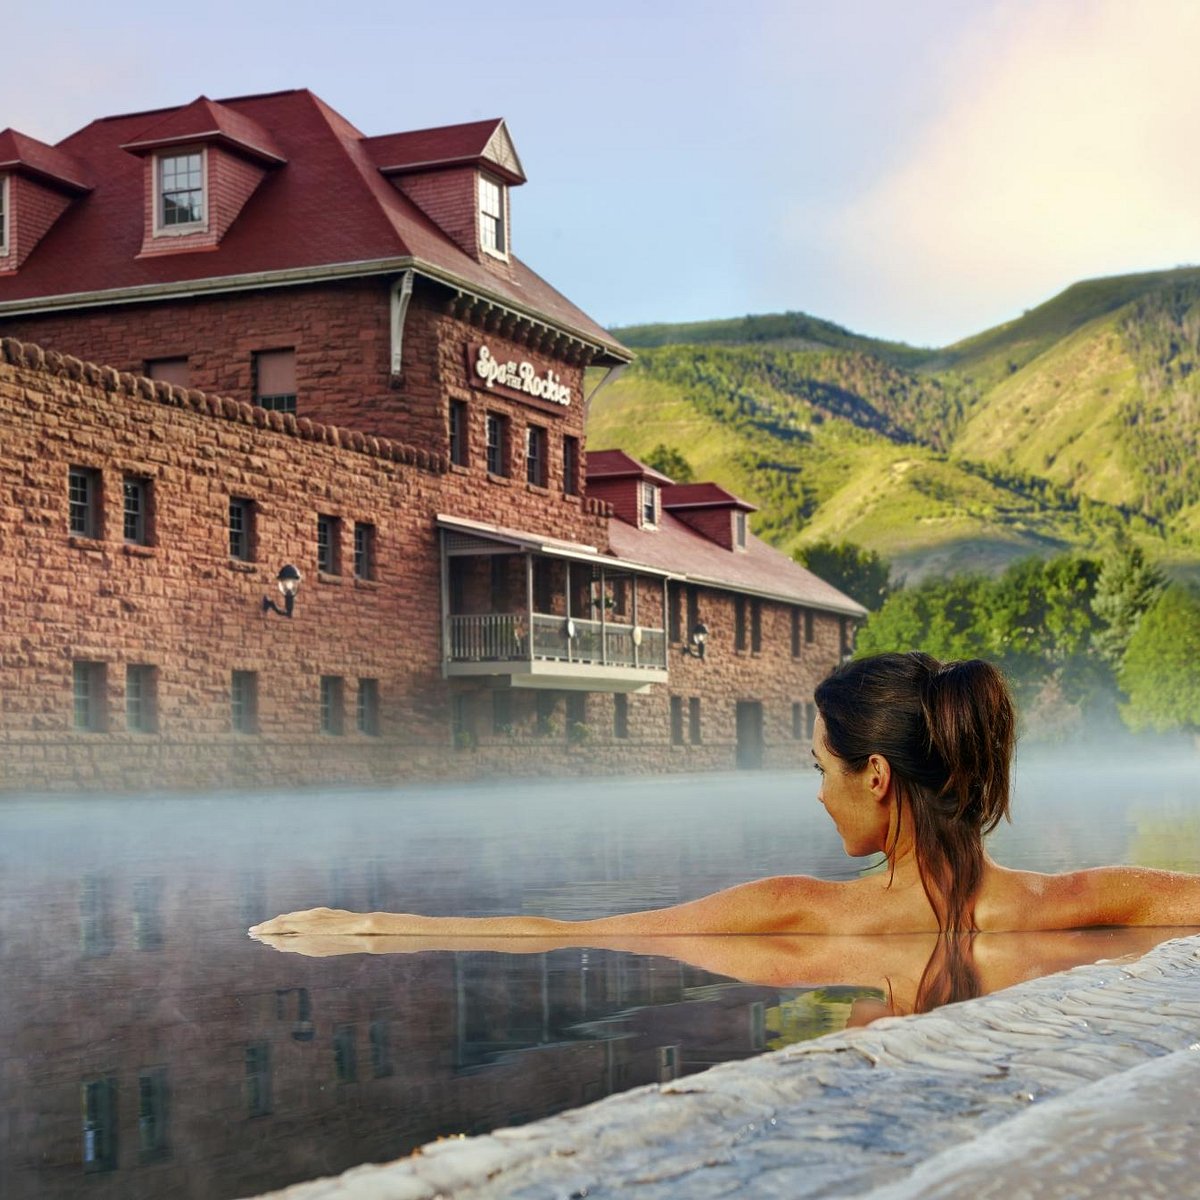 Spa of the Rockies - All You Need to Know BEFORE You Go (with Photos)